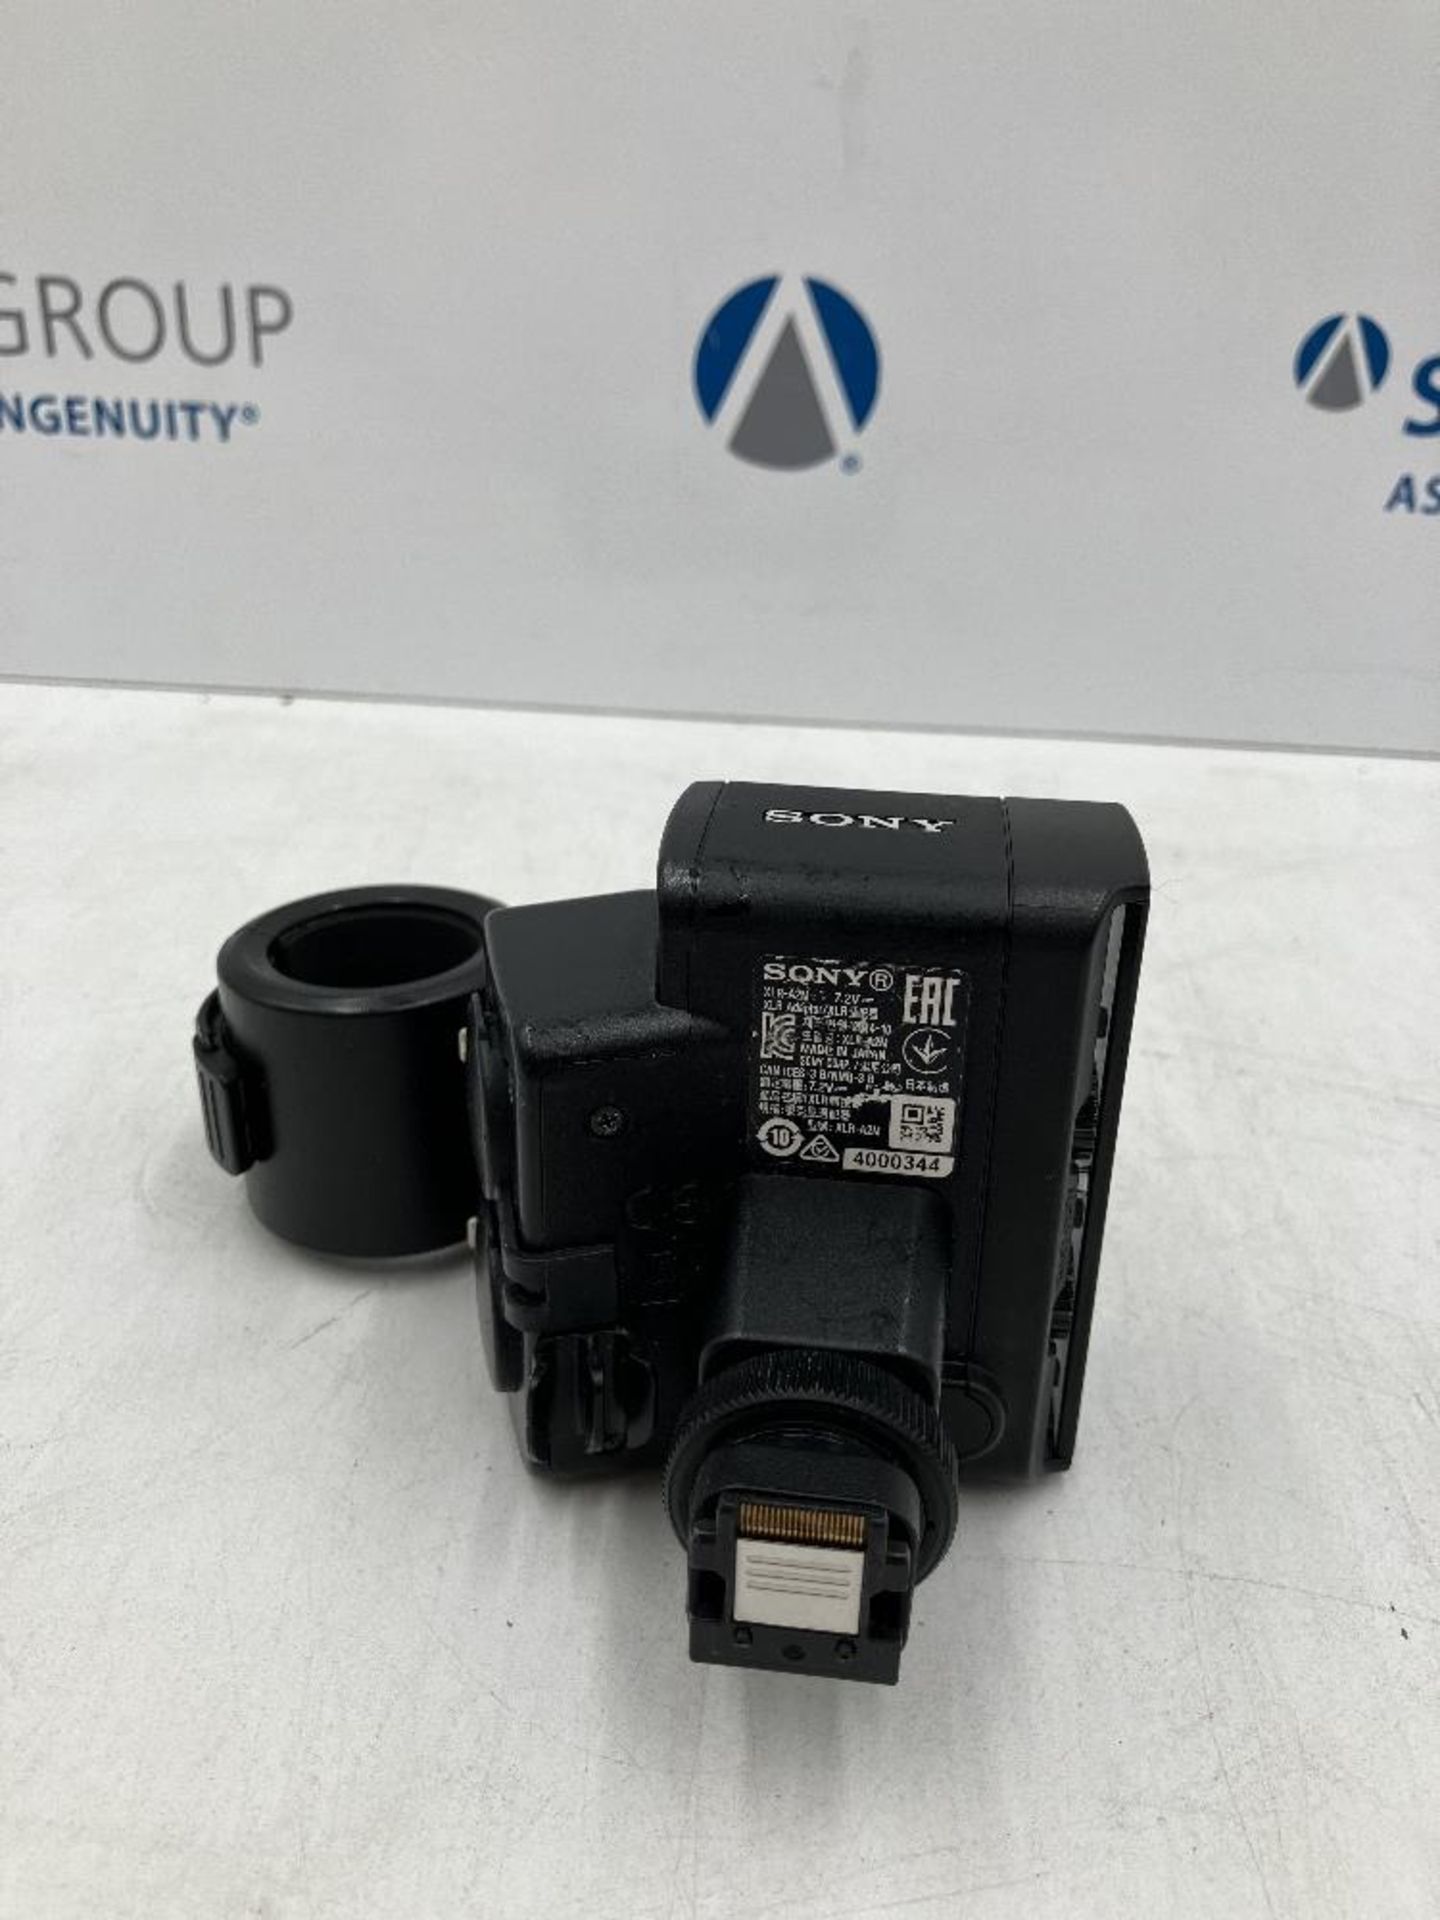 Sony XLR-A2M Audio Adaptor with Sony Microphone - Image 4 of 7